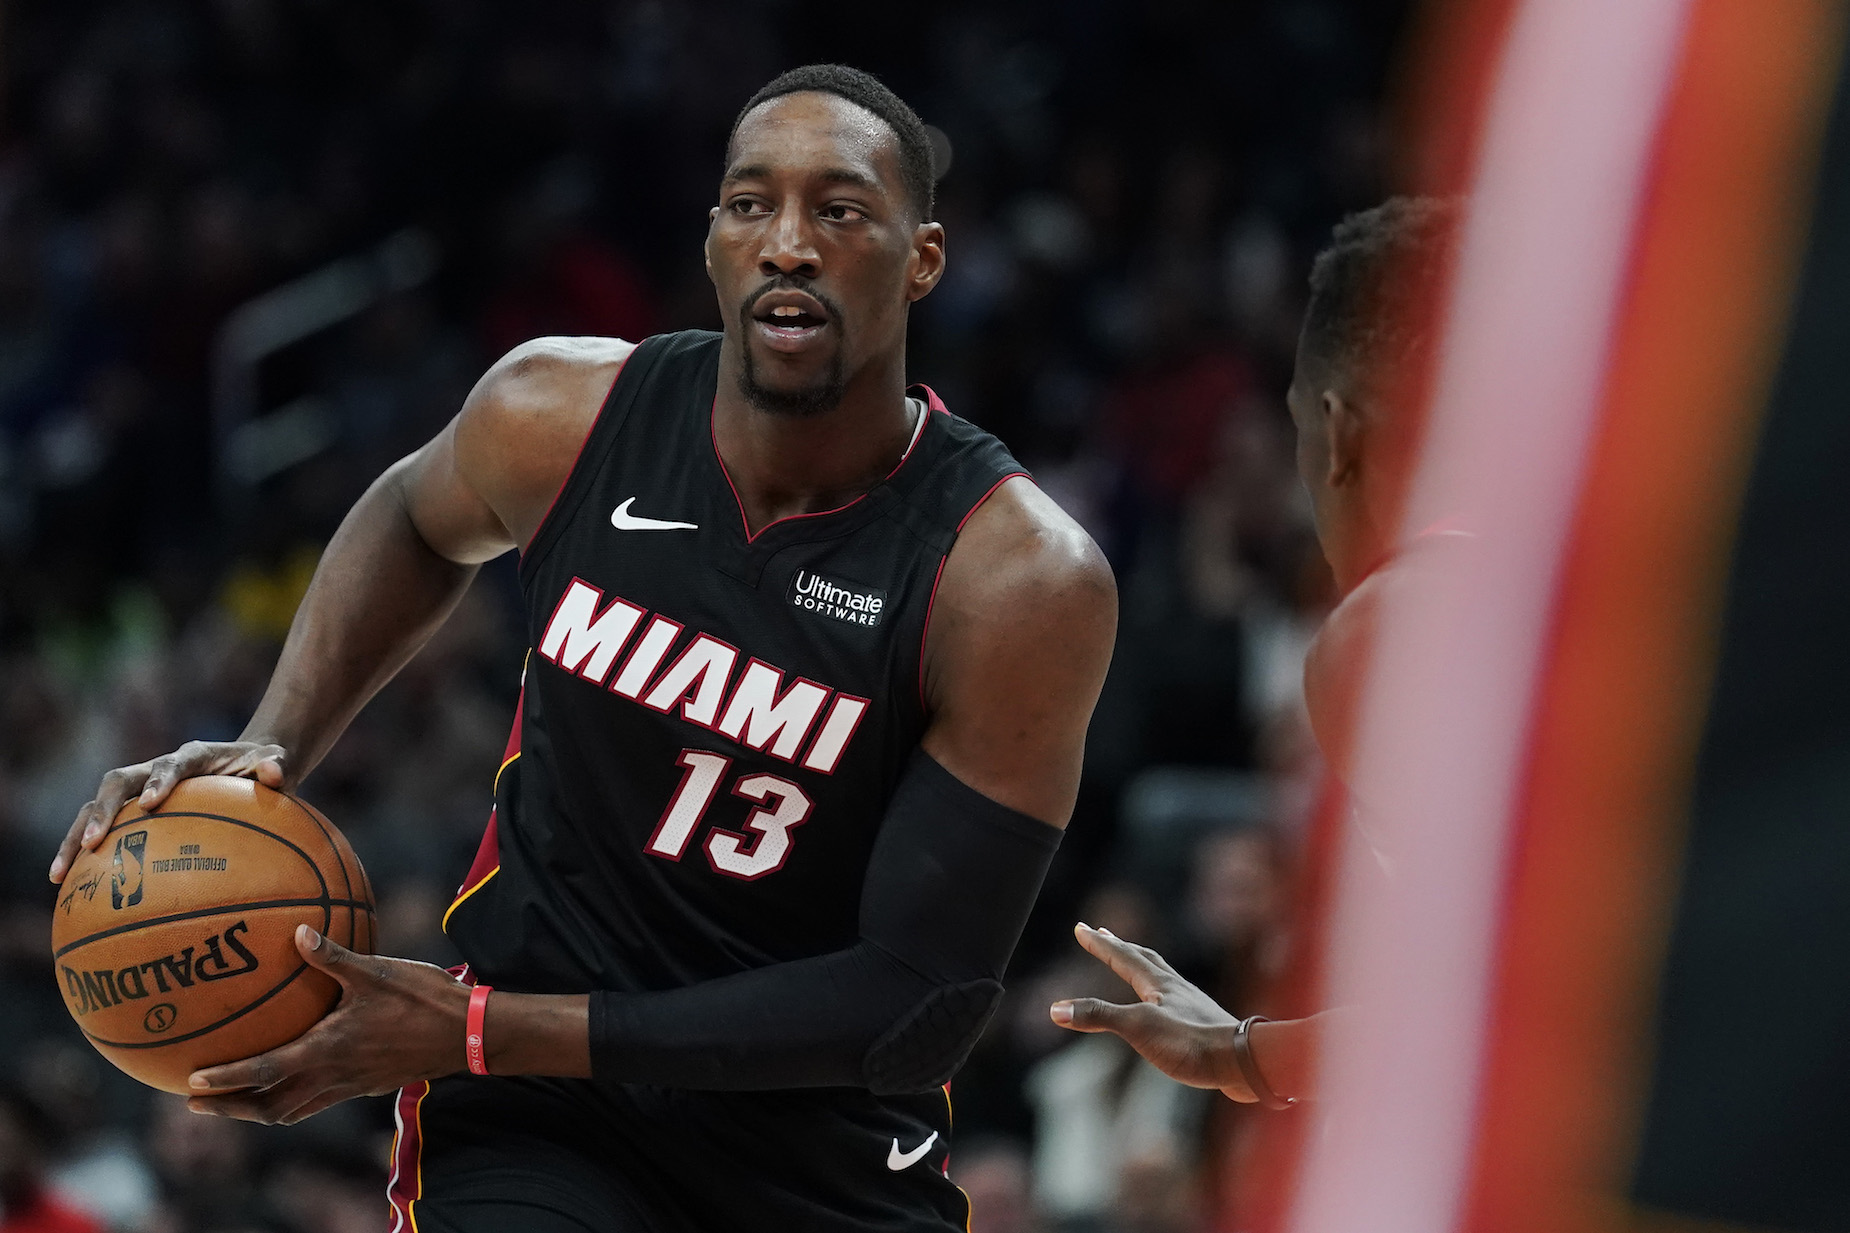 Miami Heat big man Bam Adebayo signed a massive contract extension, then gifted his mother a house.